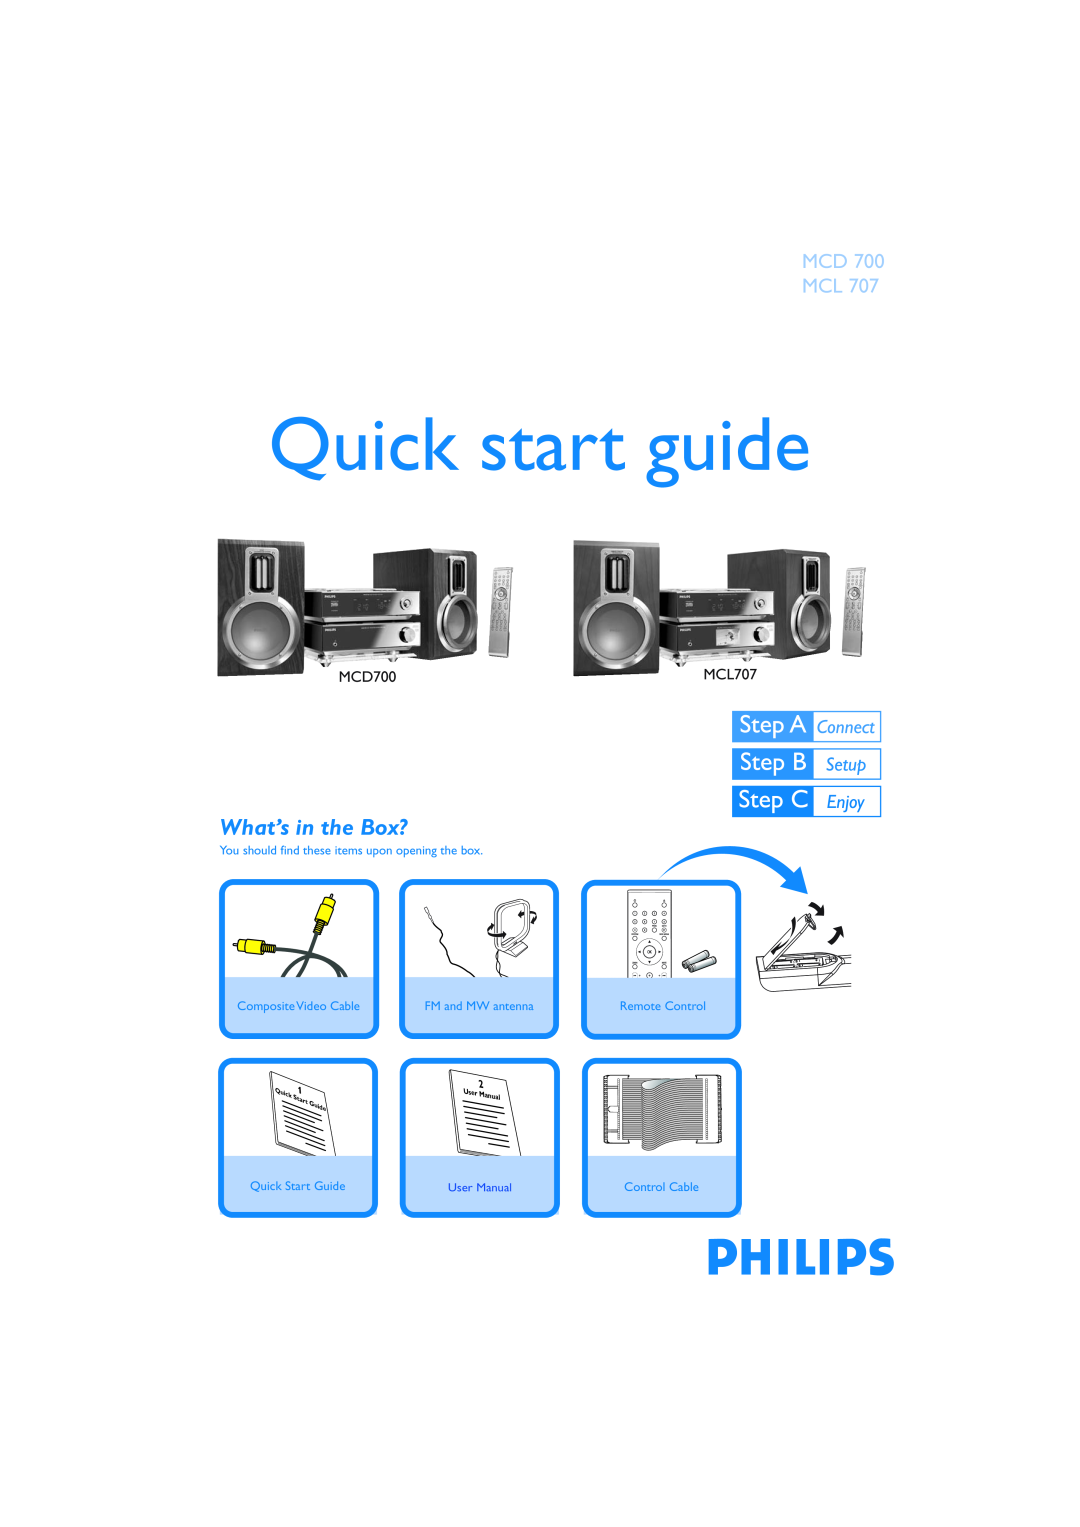 Philips MCD 702 quick start What’s in the Box?, Quick start guide, Mcd Mcd, Composite Video Cable, FM and AM antenna 